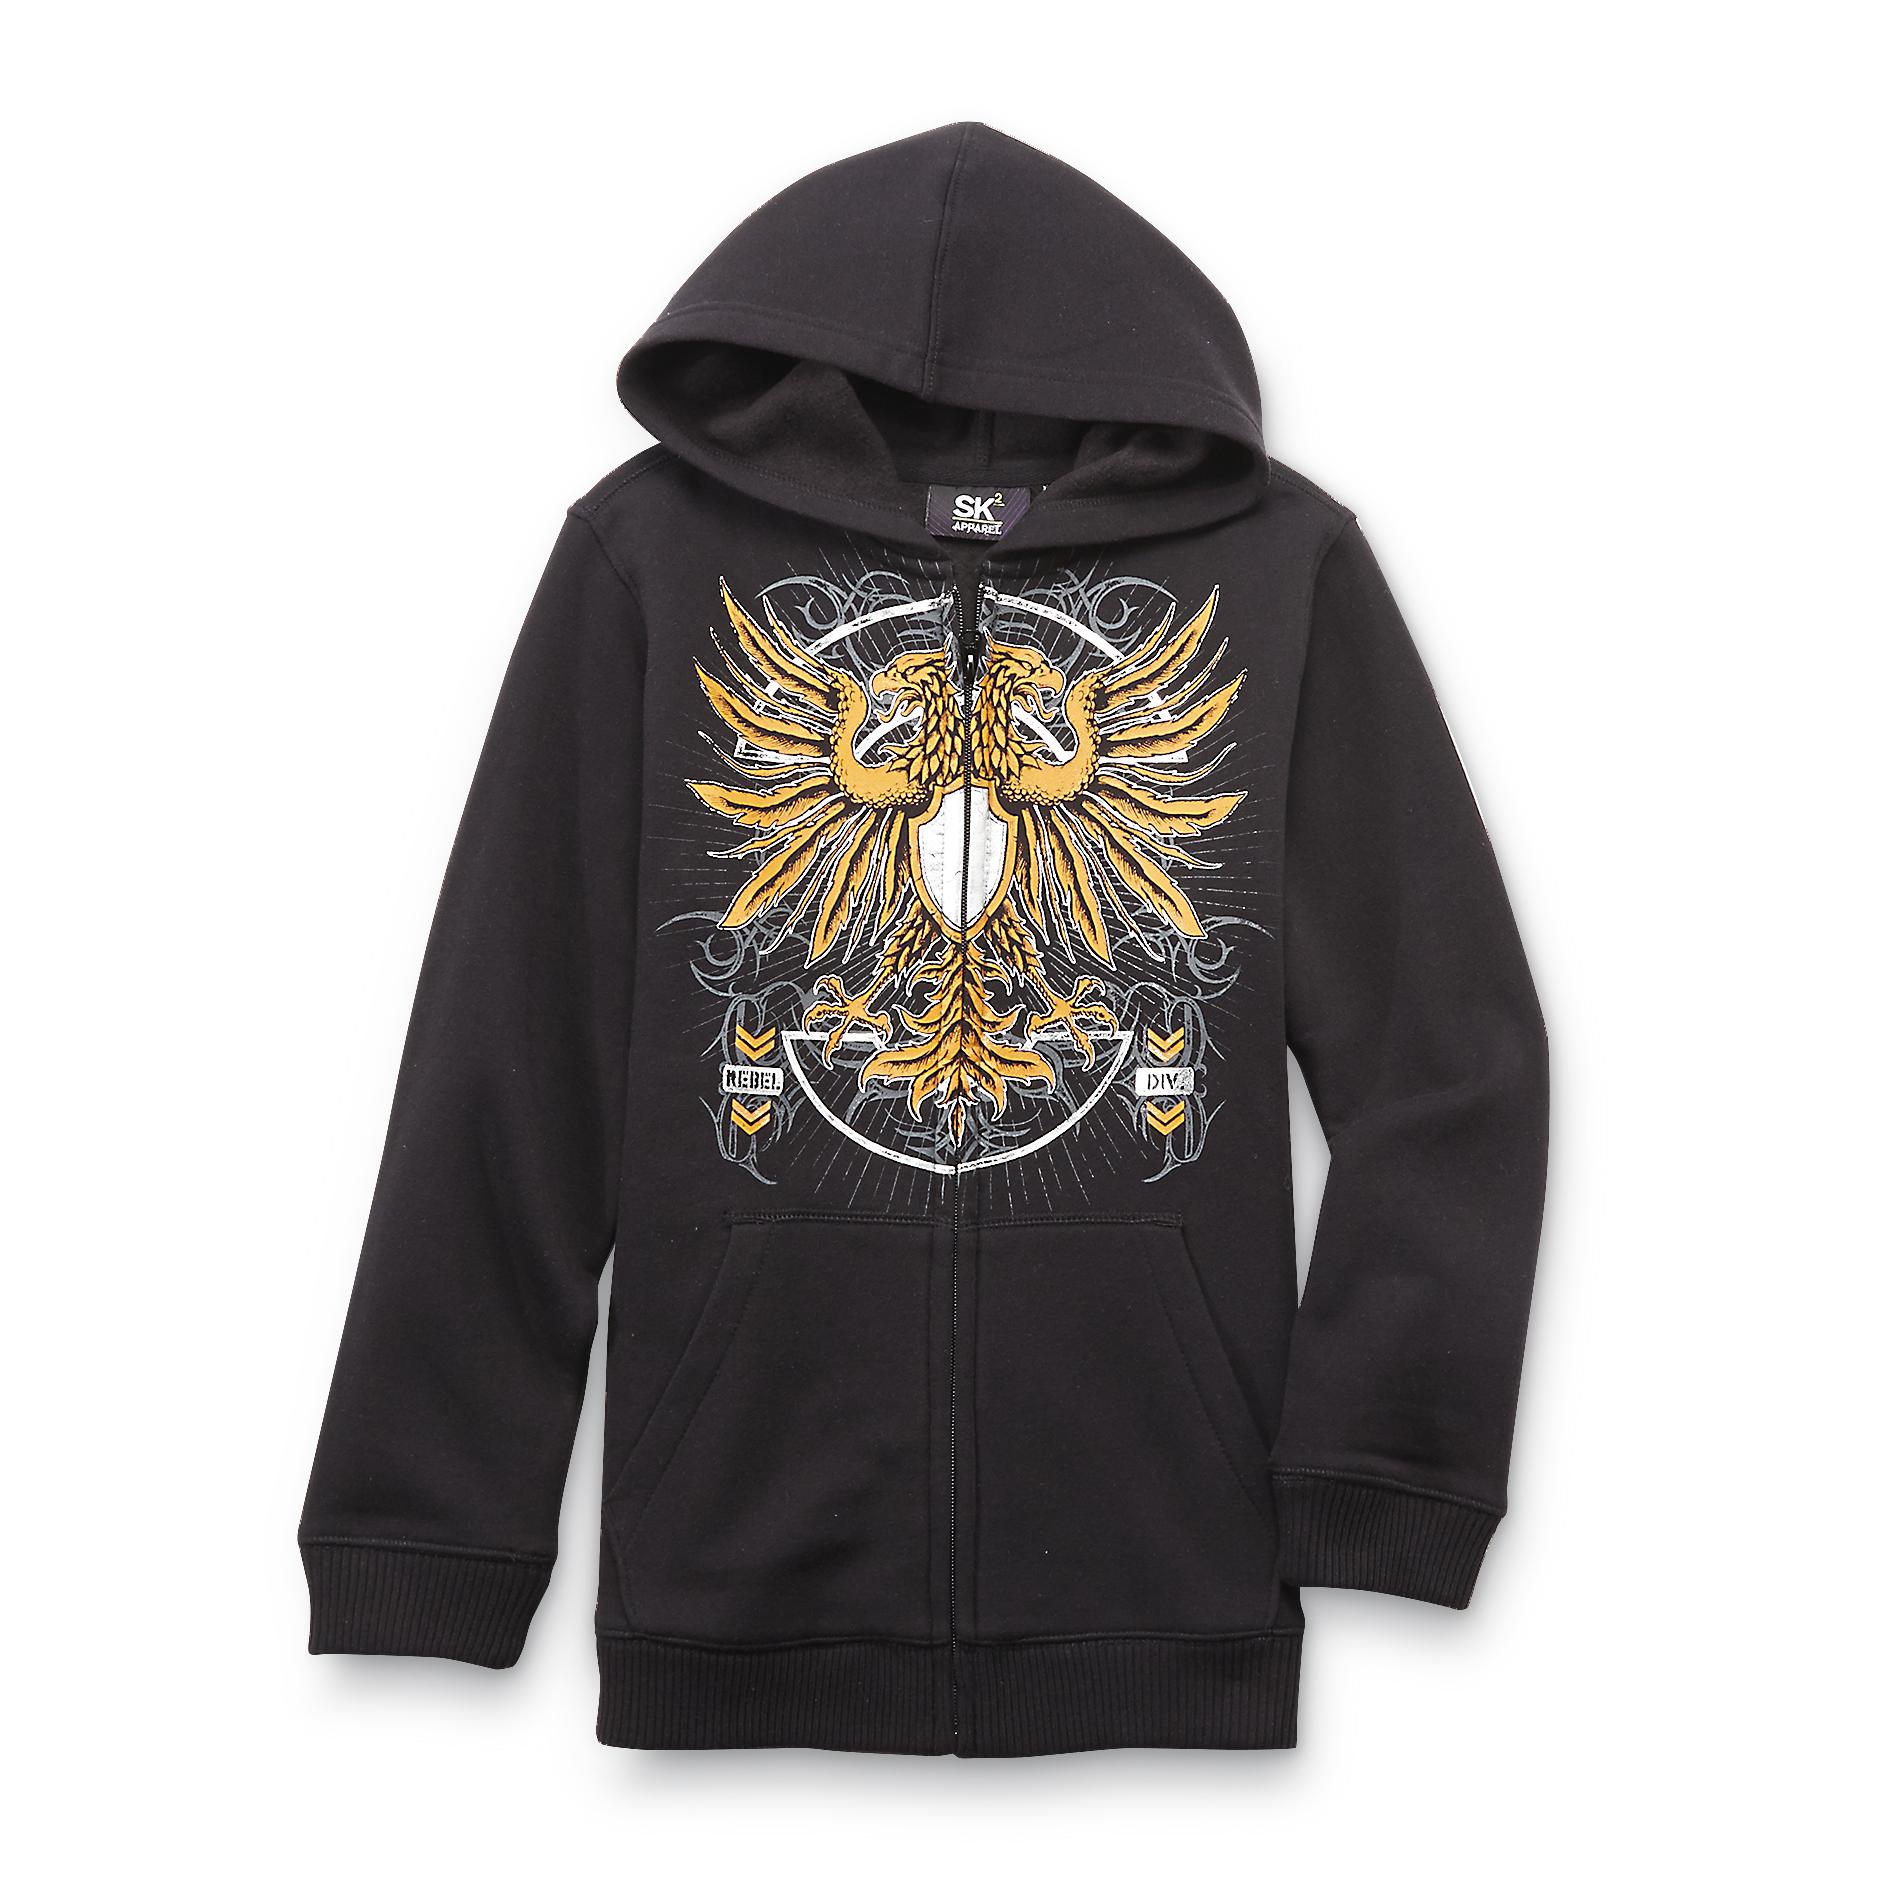 SK2 Boy's Graphic Hoodie Jacket - Double Eagle